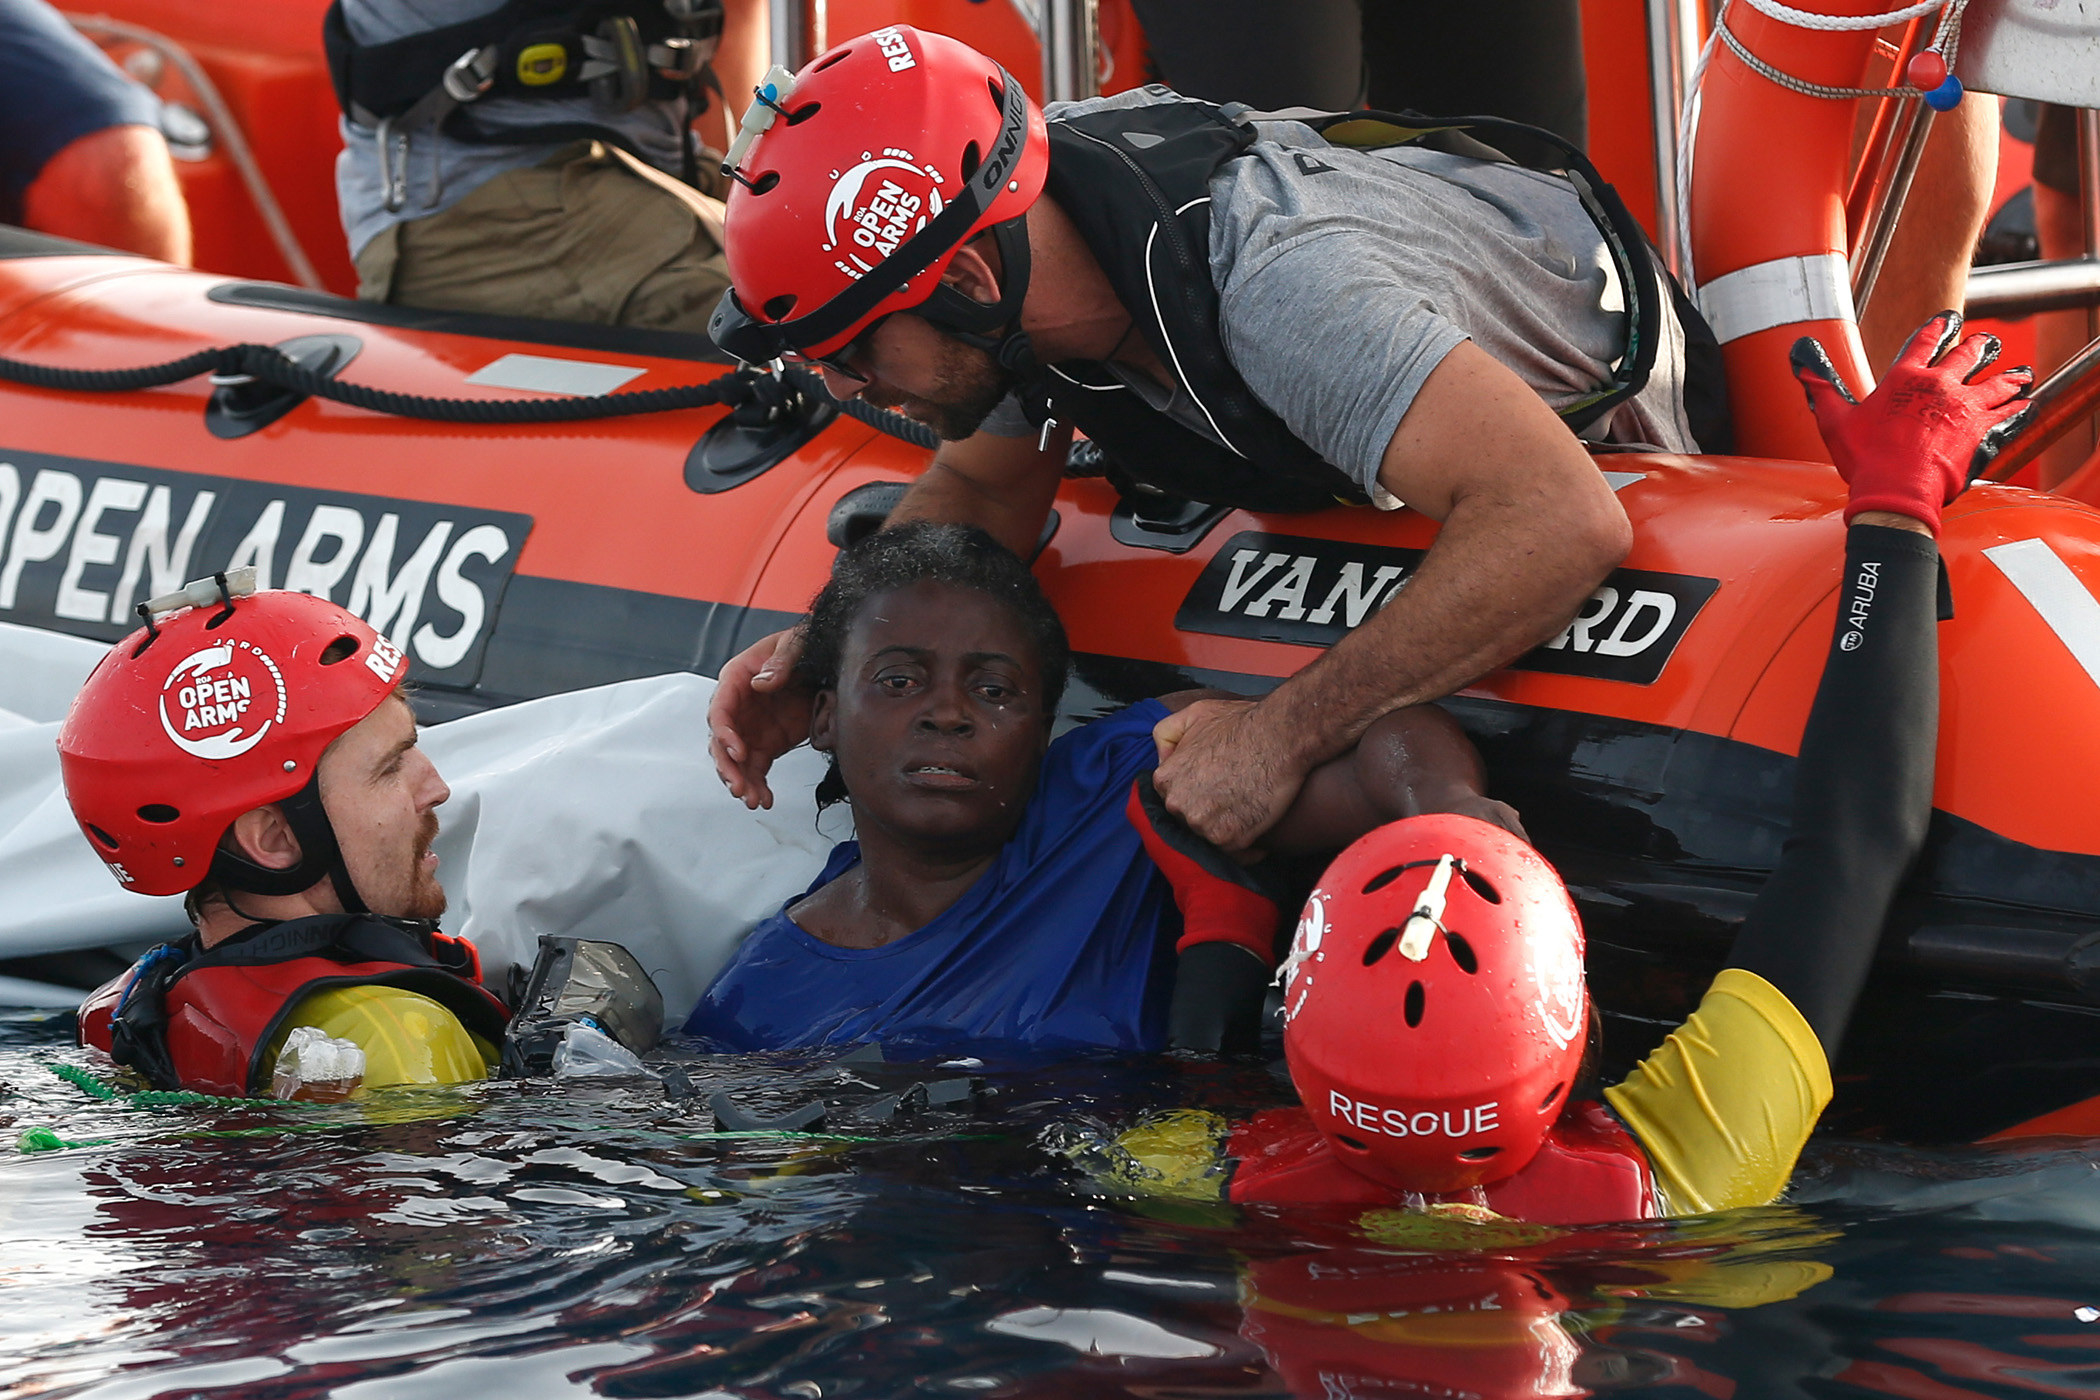 A migrant is Rescued by members of the Spanish ngo. Rescue Arm usar.